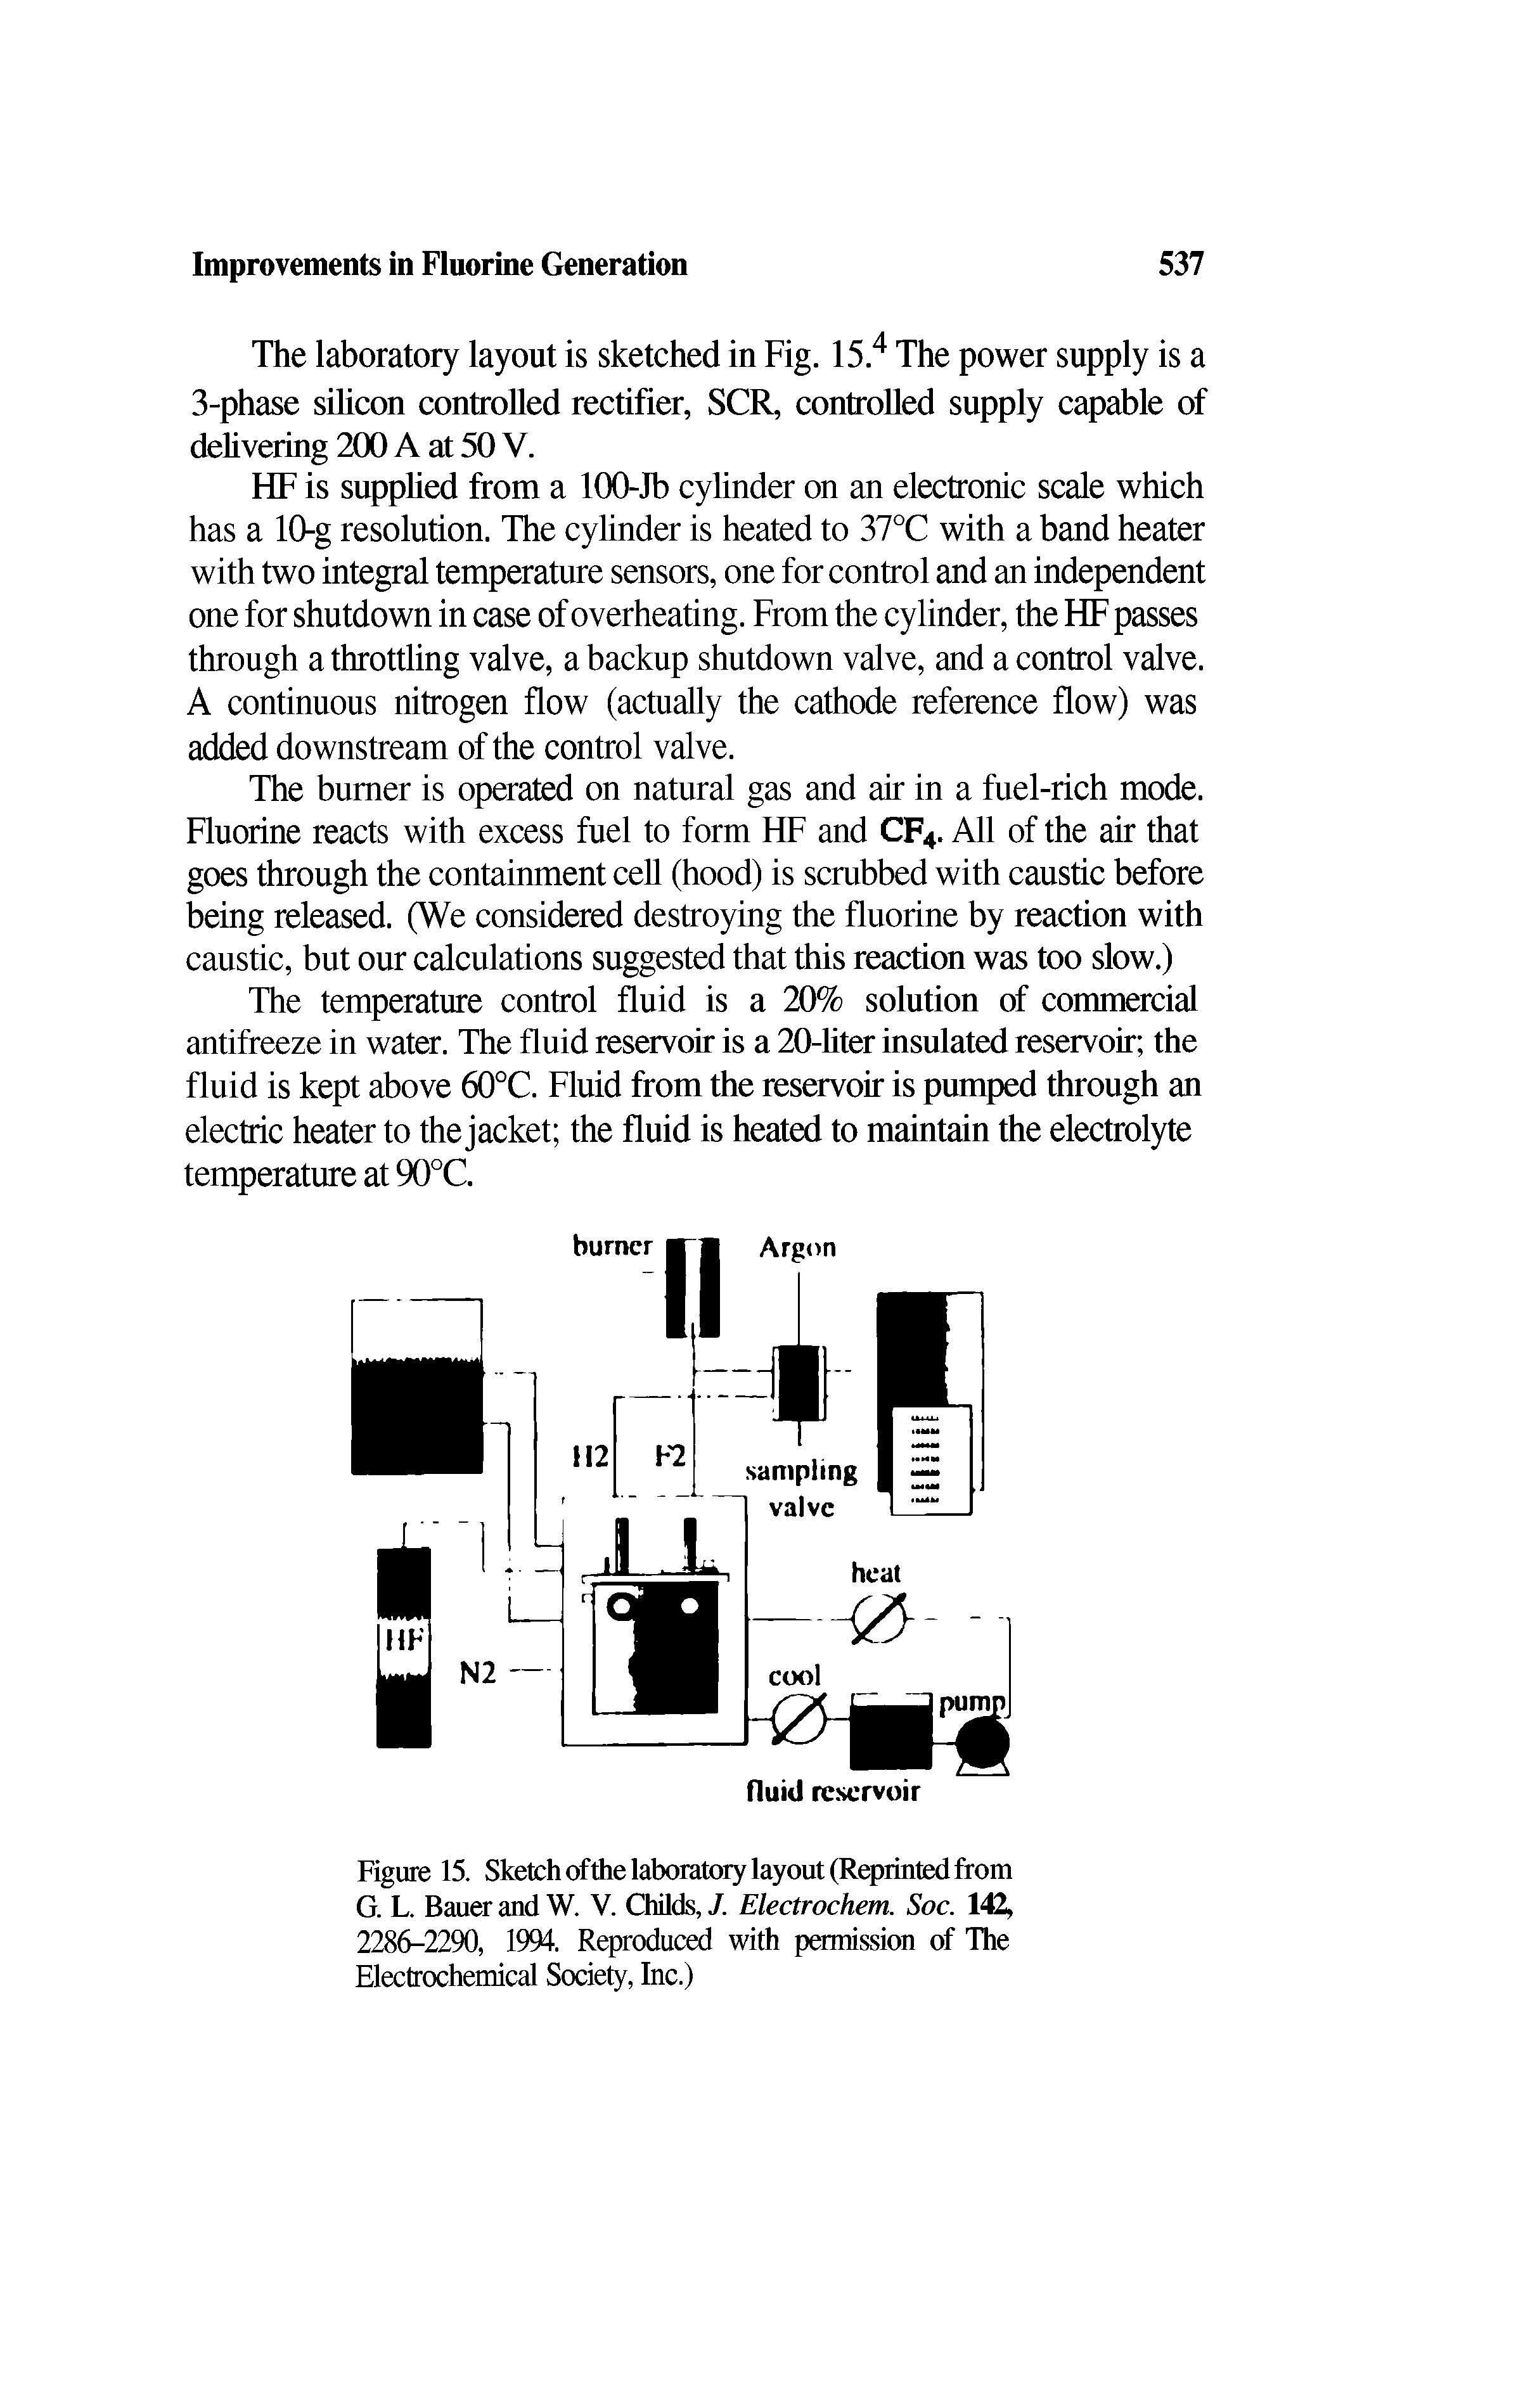 Figure 15. Sketch of the laboratory layout (Reprinted from G. L. Bauer and W. V. Childs, J. Electrochem. Soc. 142, 2286-2290, 1994. Reproduced with permission of The Electrochemical Society, Inc.)...